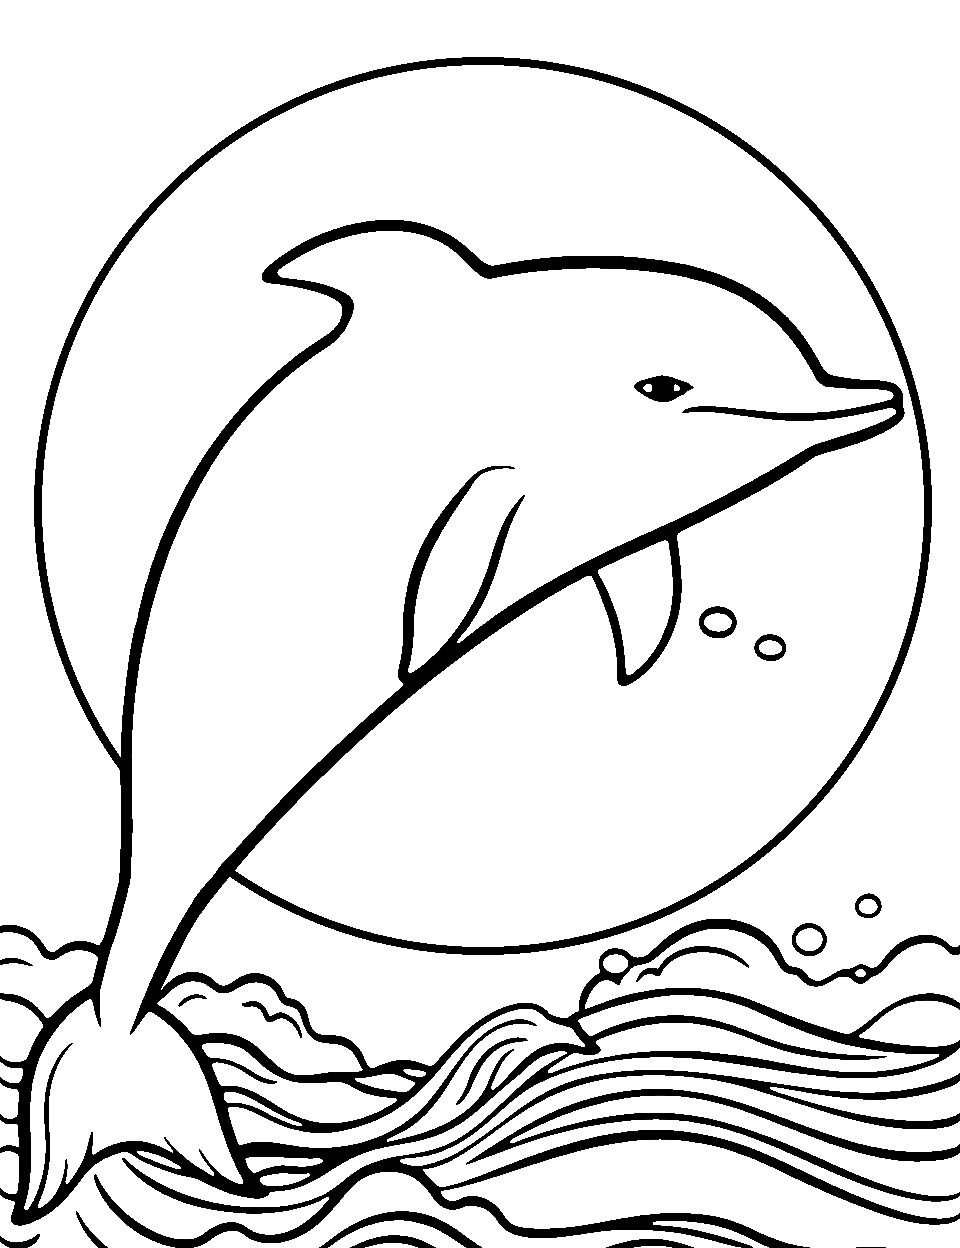 Summer Dolphin Sunset Coloring Page - A dolphin silhouetted against a vibrant summer sunset, creating a peaceful evening seascape.